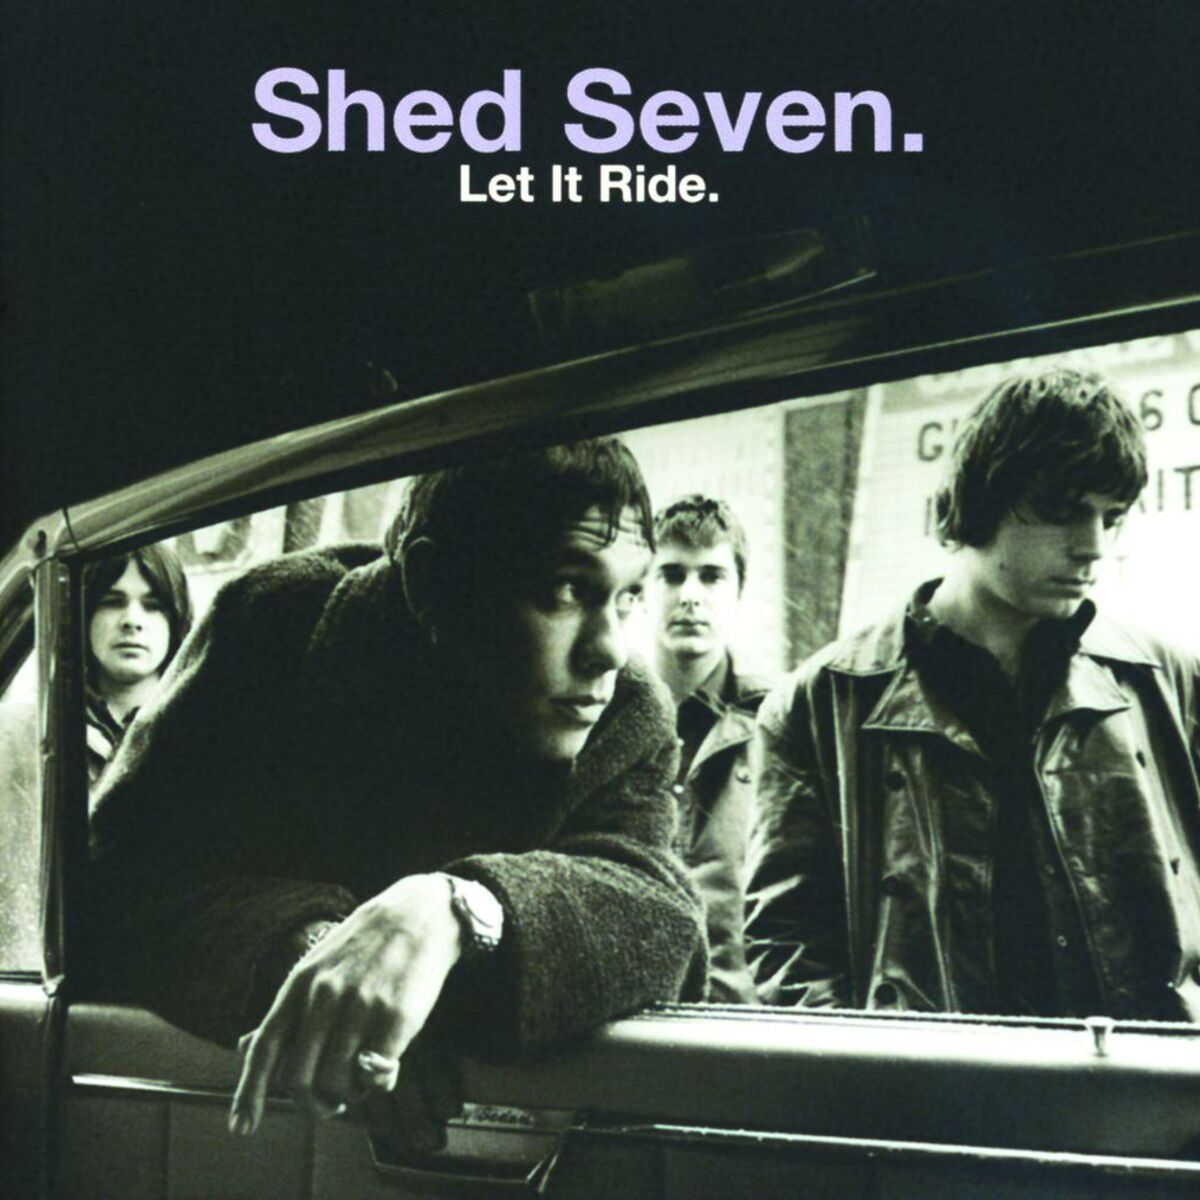 Shed Seven: albums, songs, playlists | Listen on Deezer